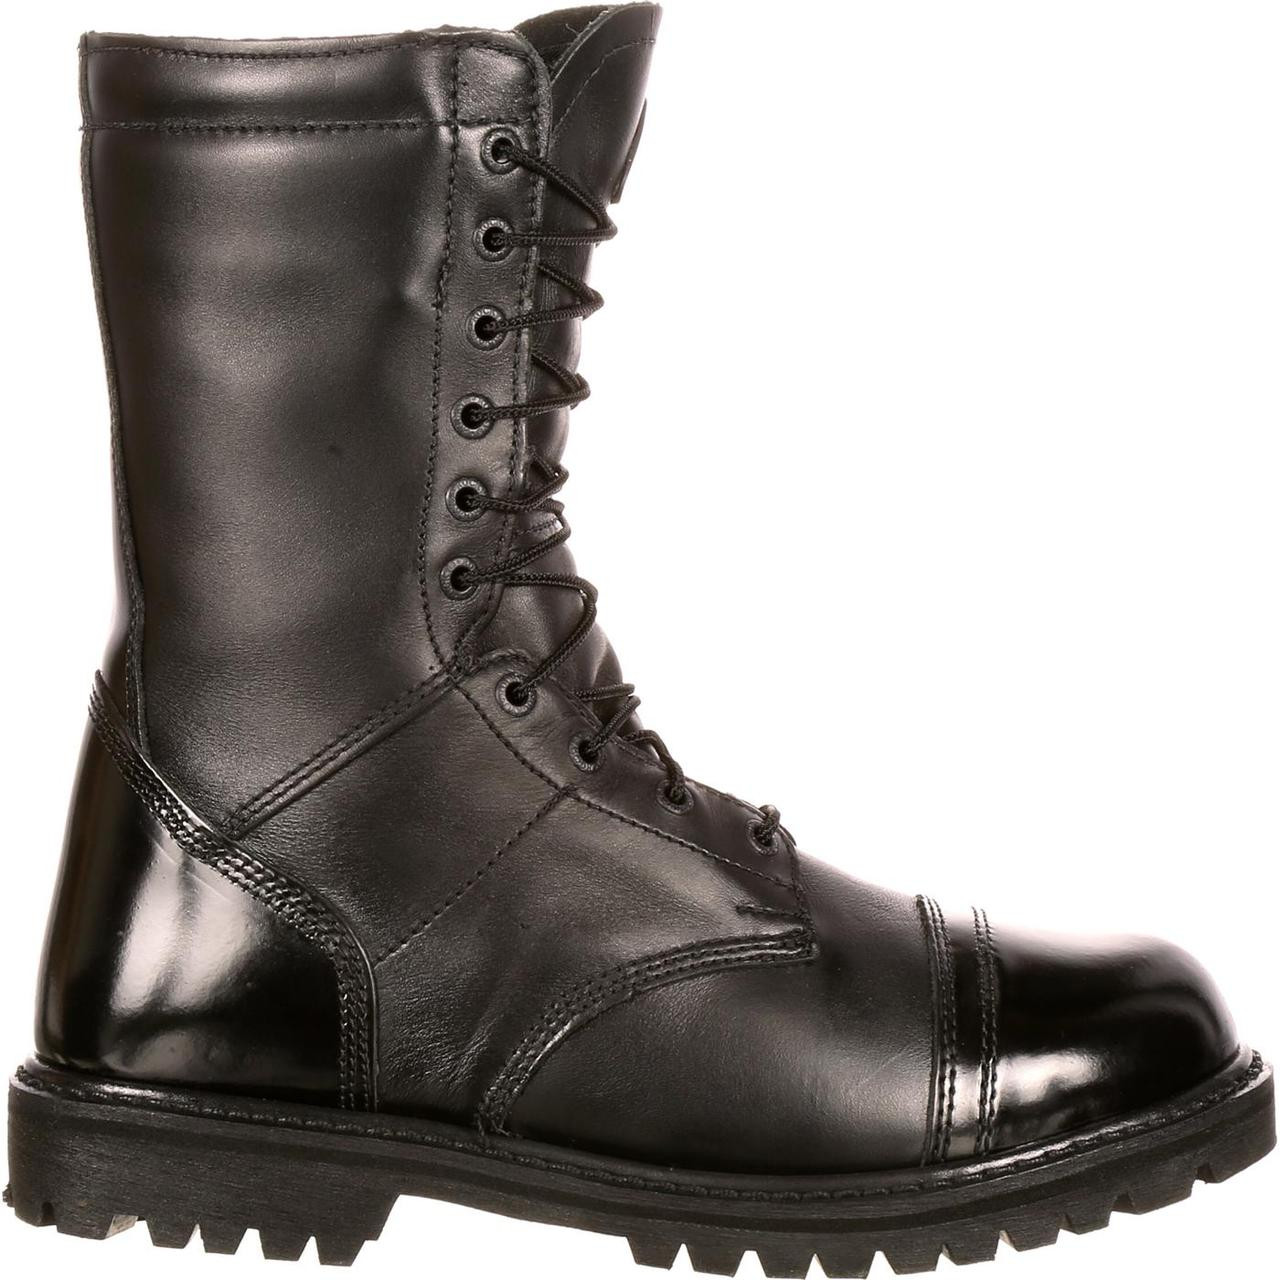 ocp boots with zipper